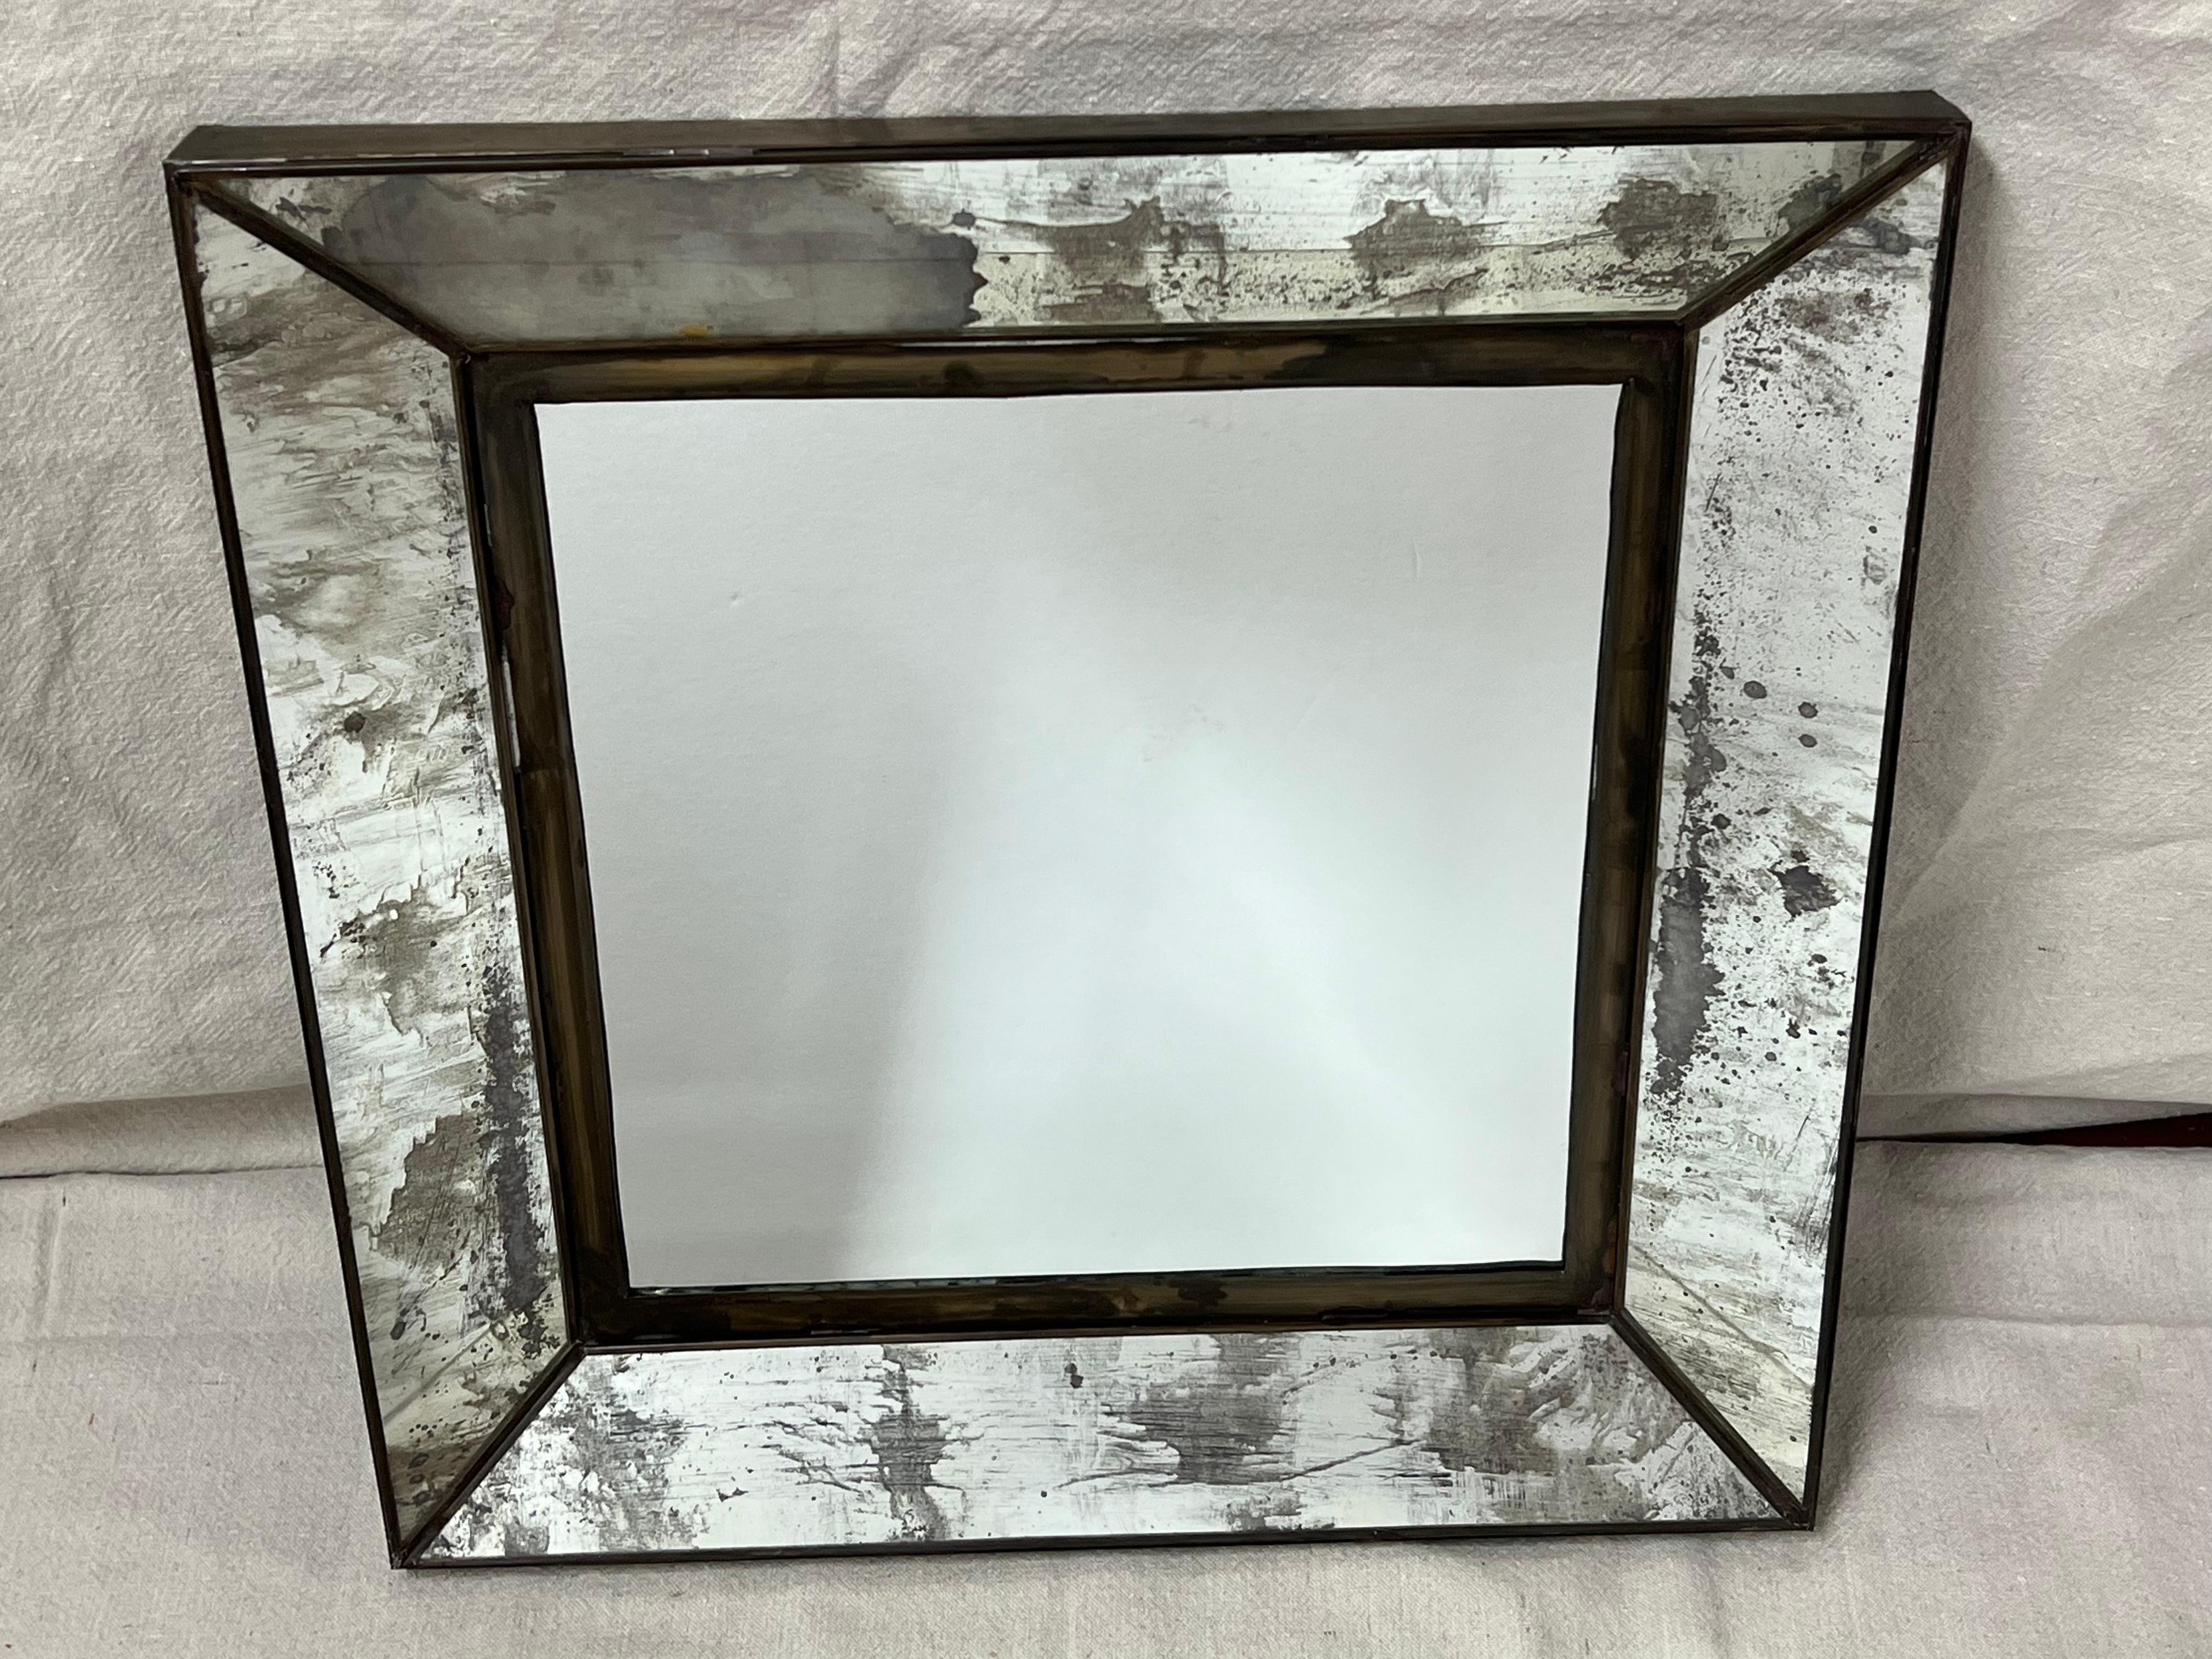 Handcrafted Square Mexican Tin Mirror.  Perfect for a home with small wall space . 
This rustic handcrafted mirror is loaded with character and has antique appeal.
Inspired by a vintage Mexican picture frame it has a distressed finish and an